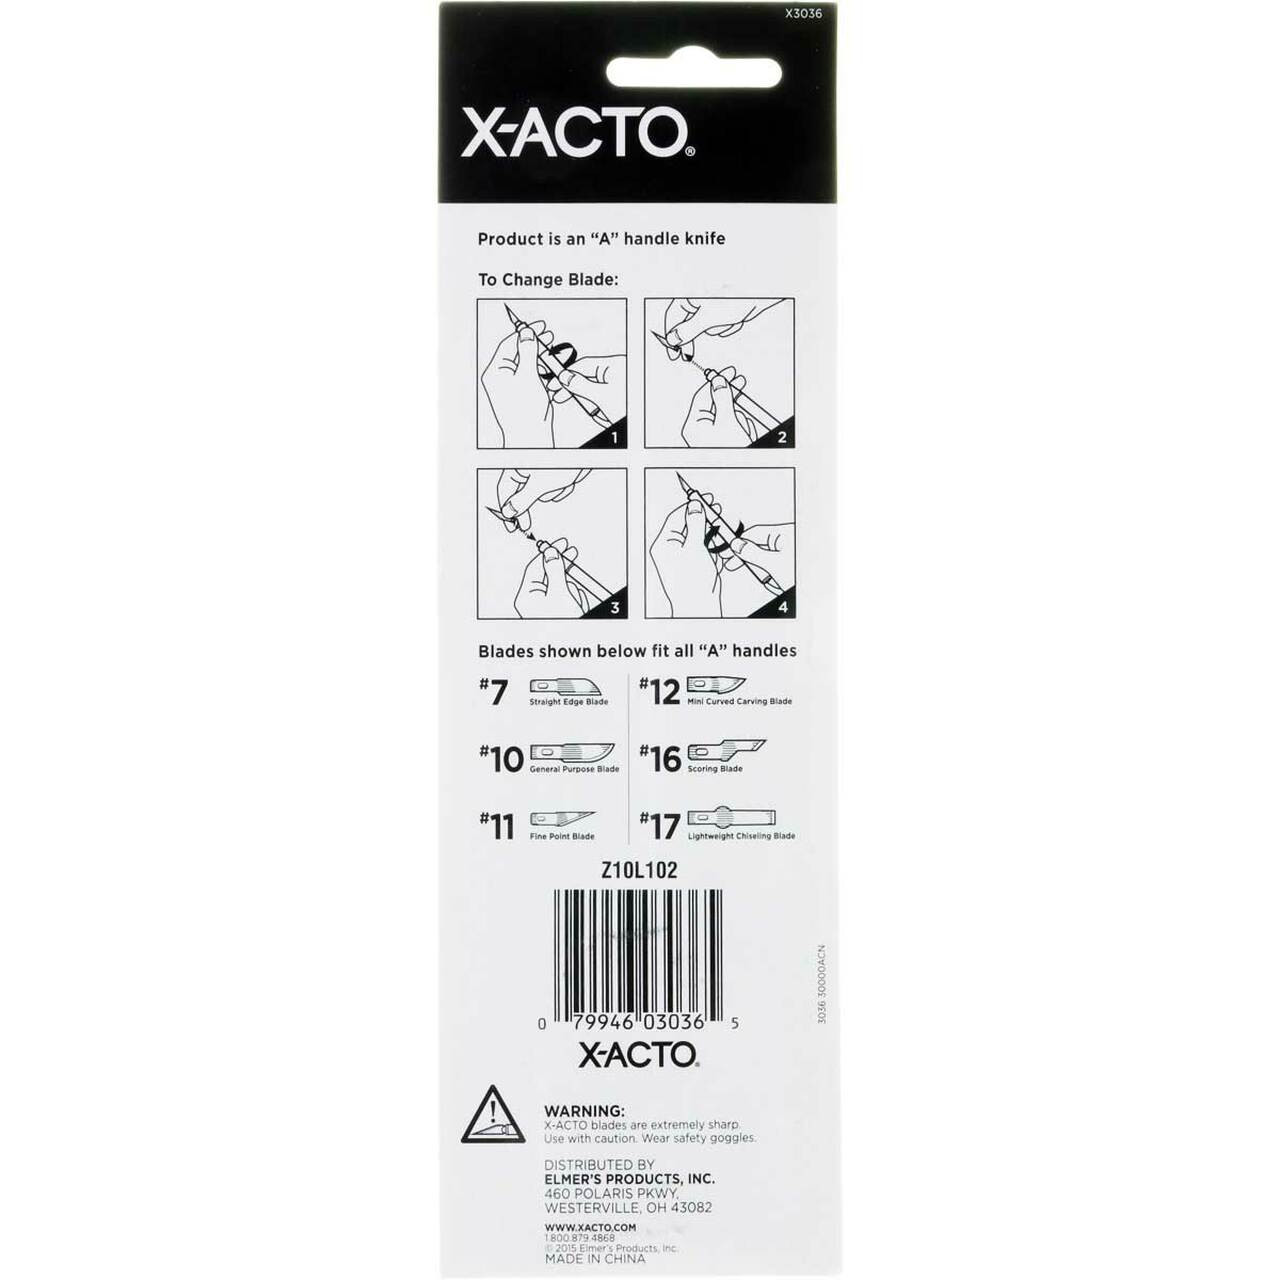 How to use an Xacto Knife: Xacto Knife Safety 